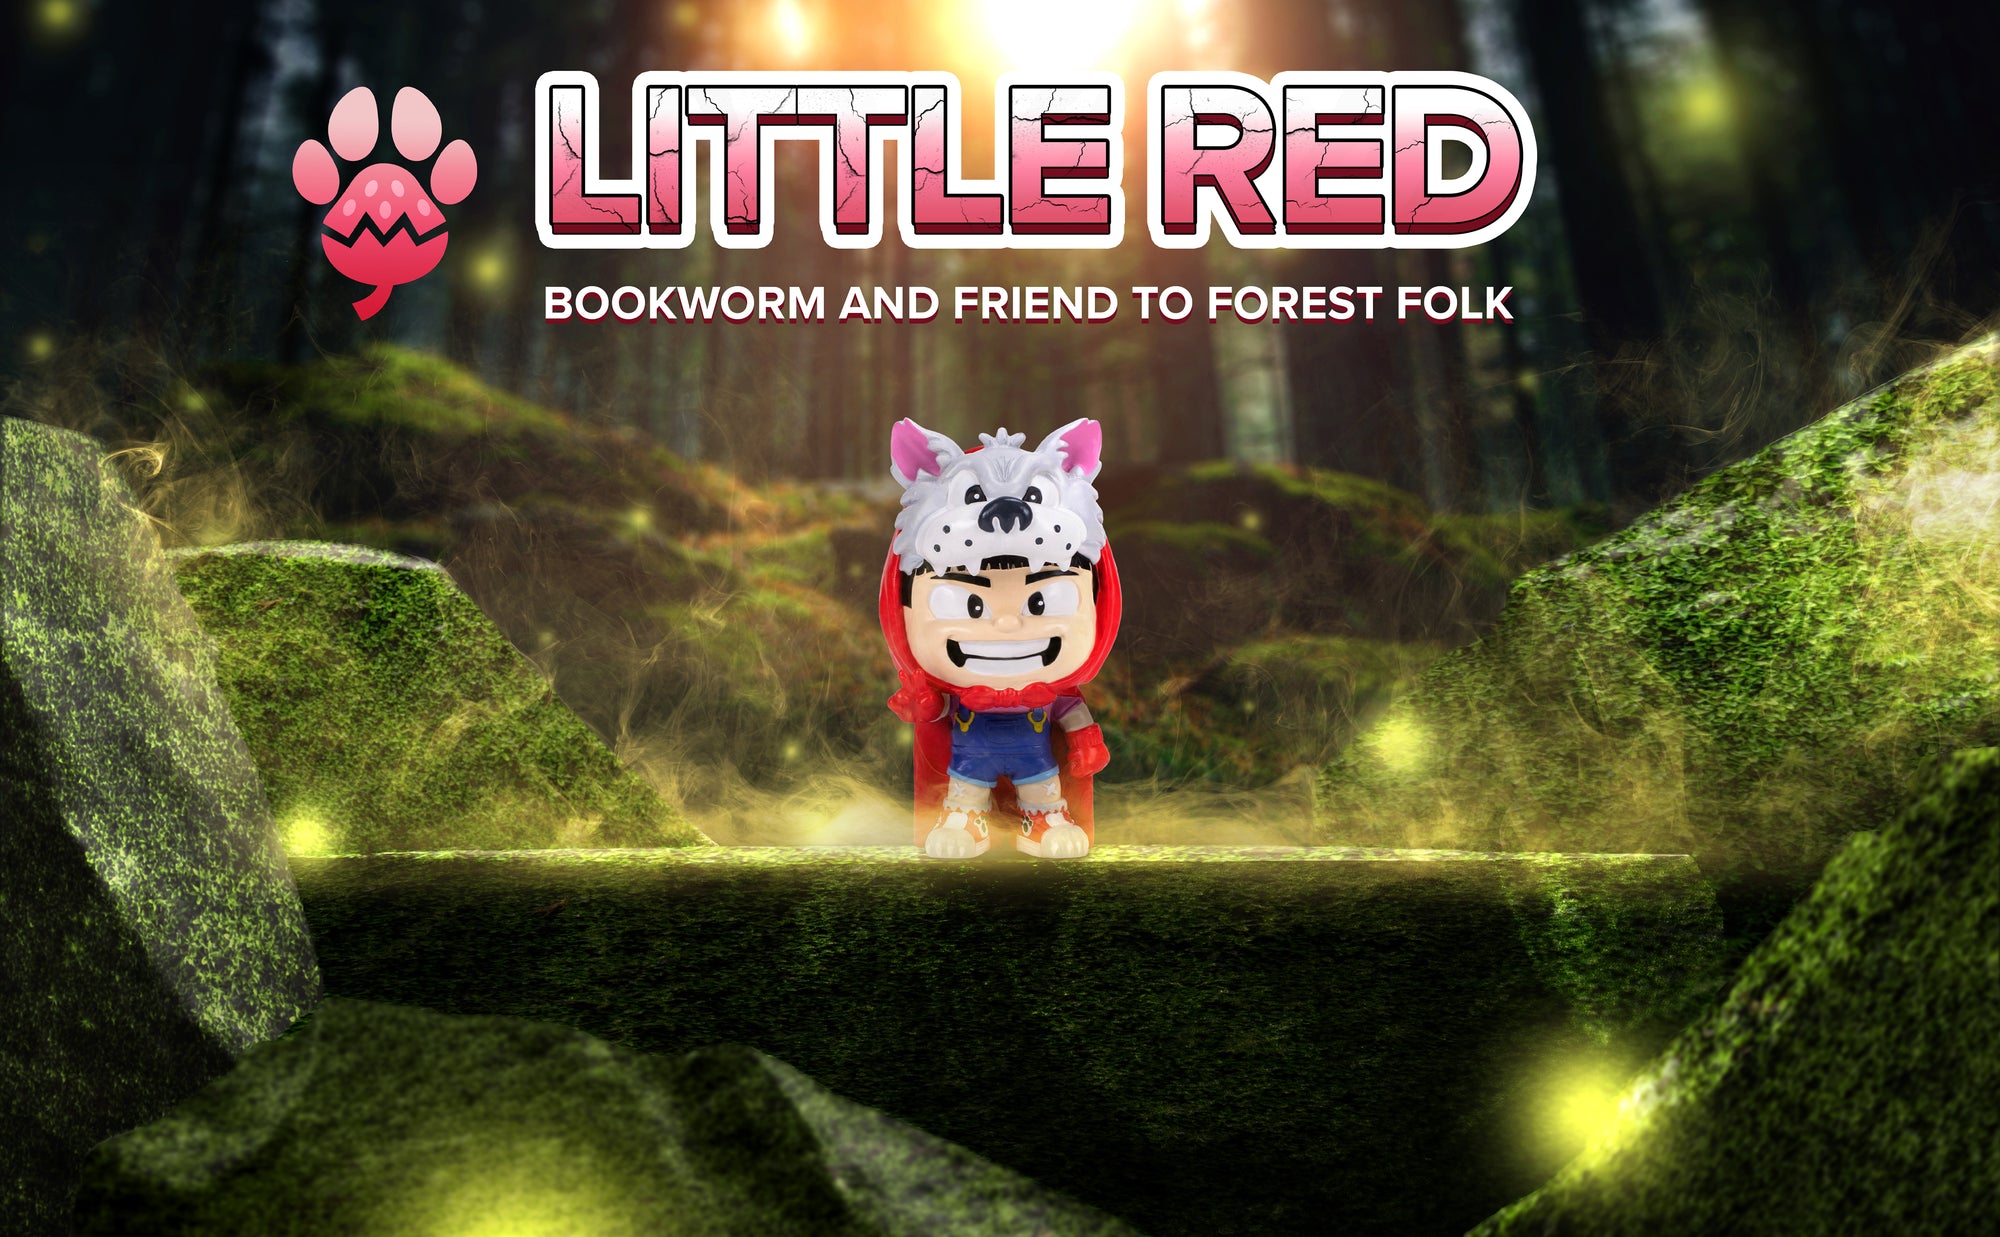 Little Red Riding Hood Smashcraft collectible in realistic enchanted woods, Fantum Forest. Text "Little Red, Bookworm and friend to forest folk" and Little Red's berry wolf logo